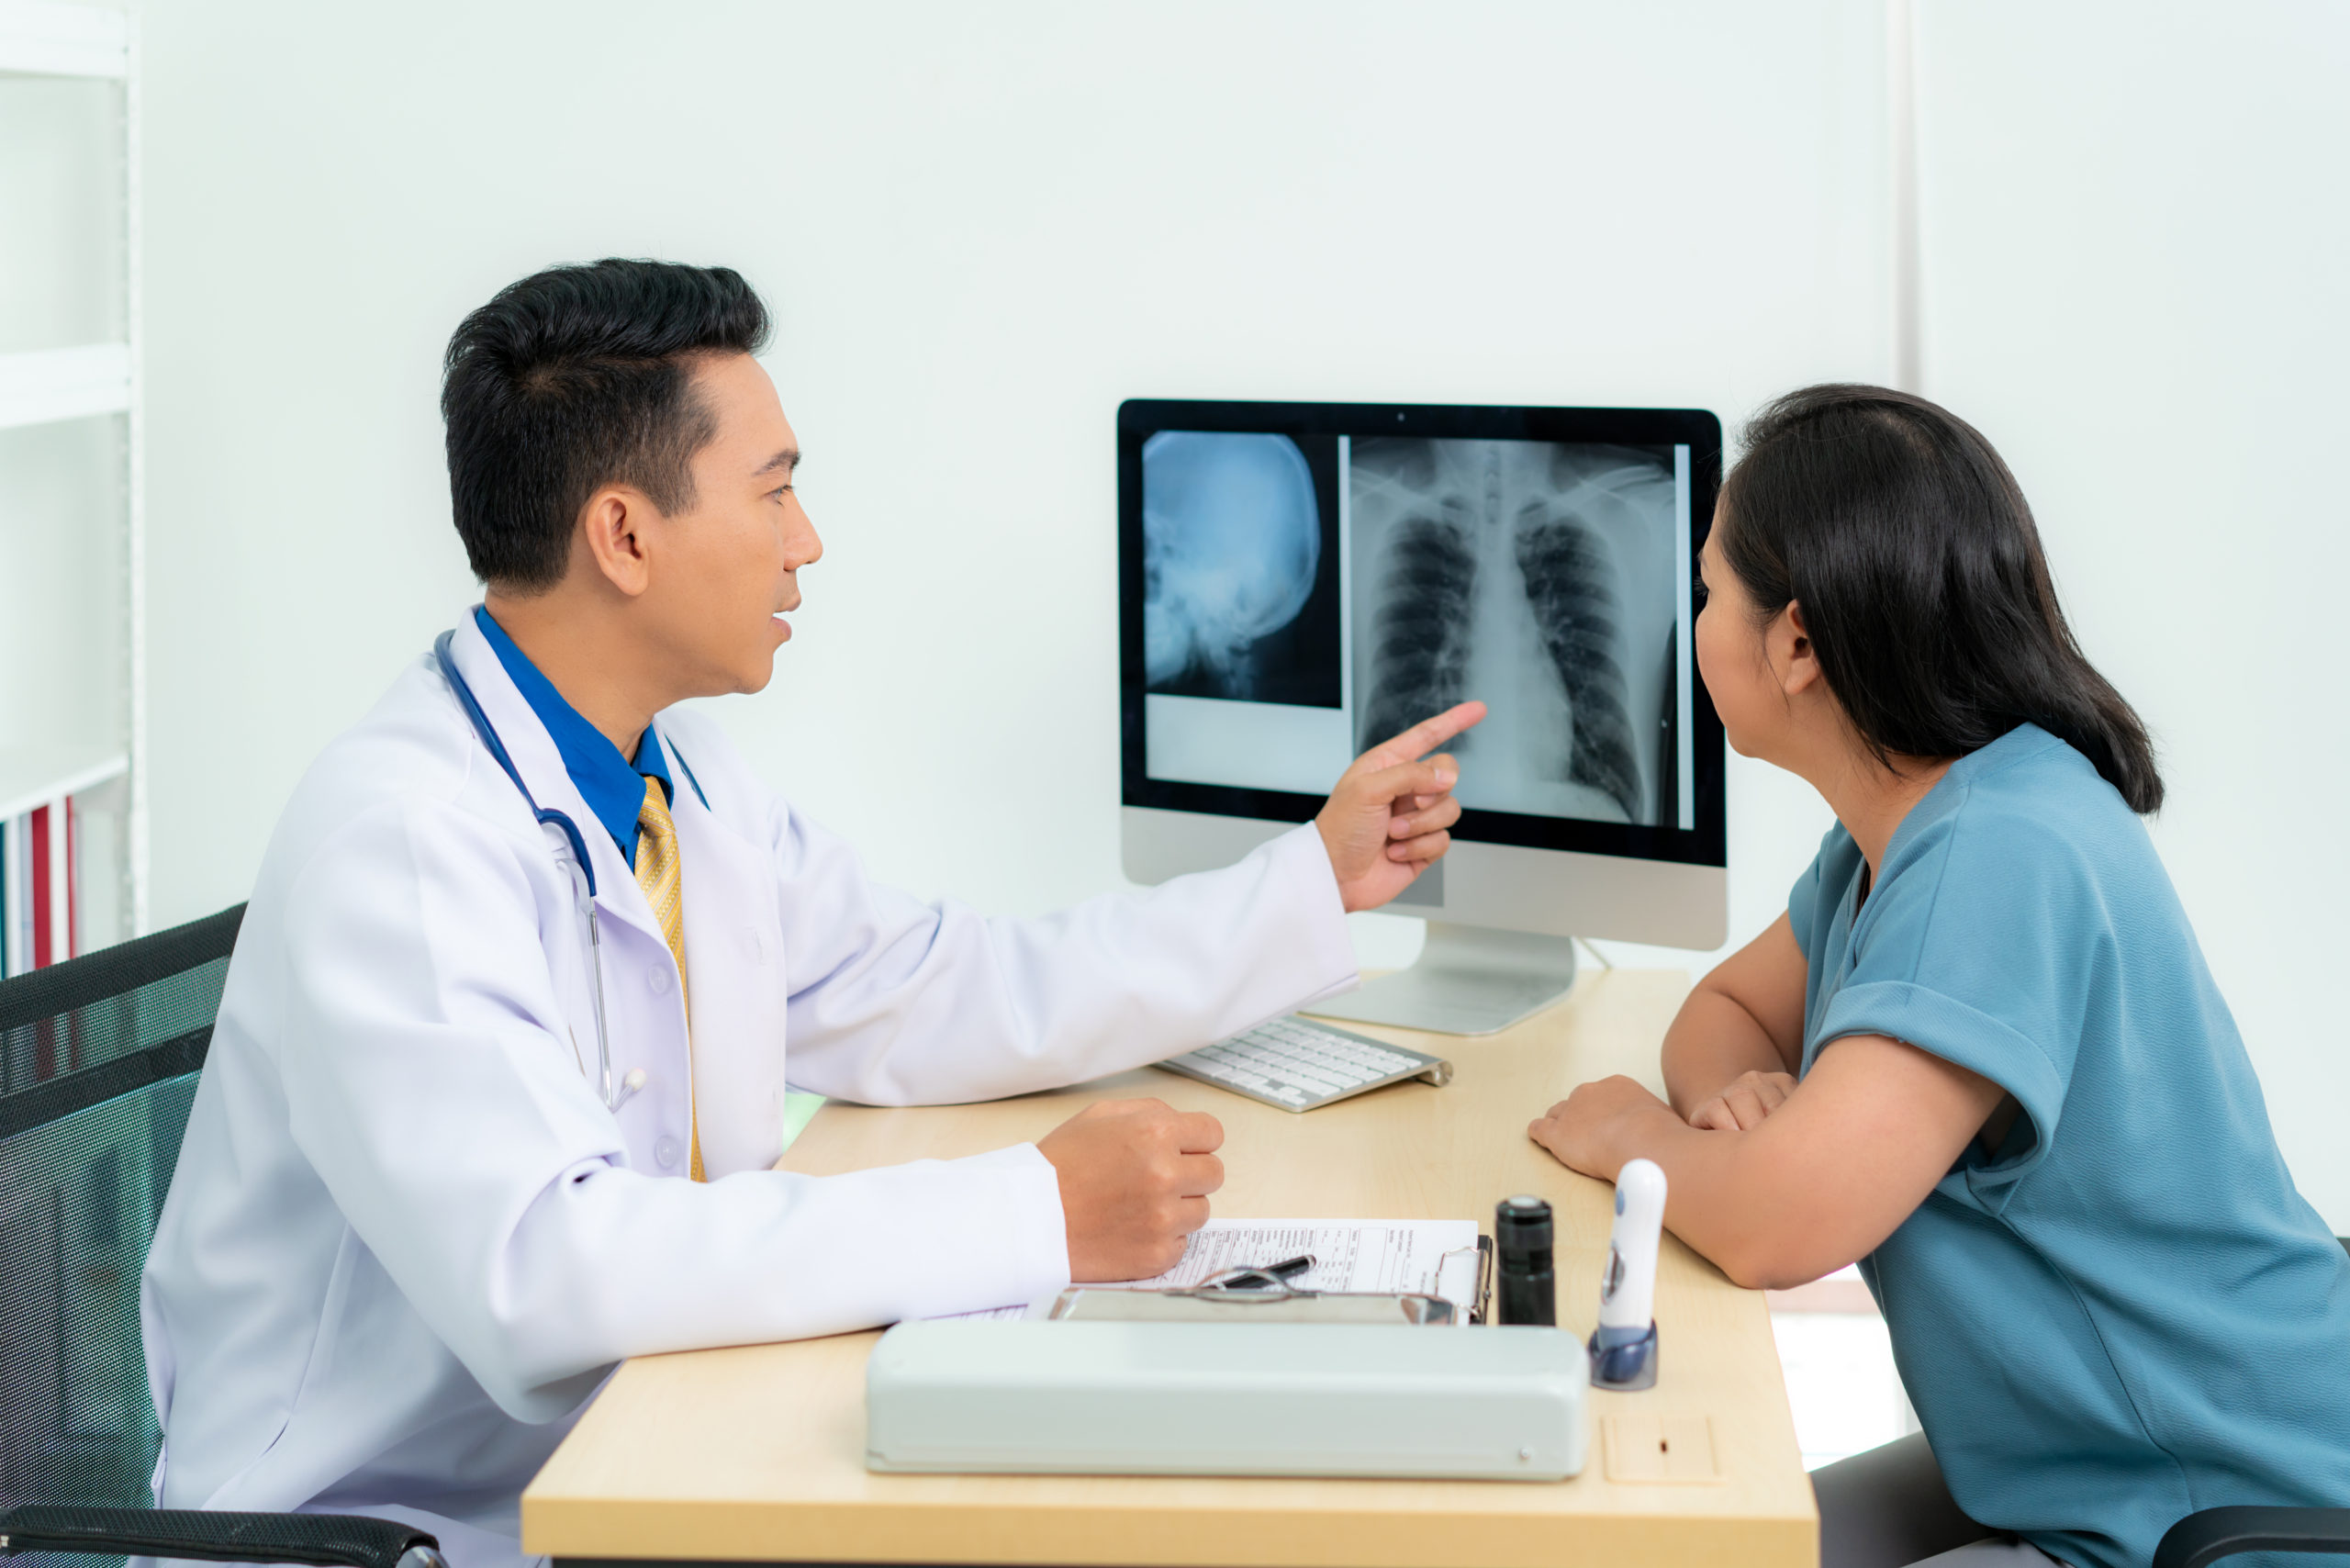 Asian doctor man medical diagnosis of lungs and reported bad news for cancer. Patient listening x-ray scan results from doctor at radiology at hospital.